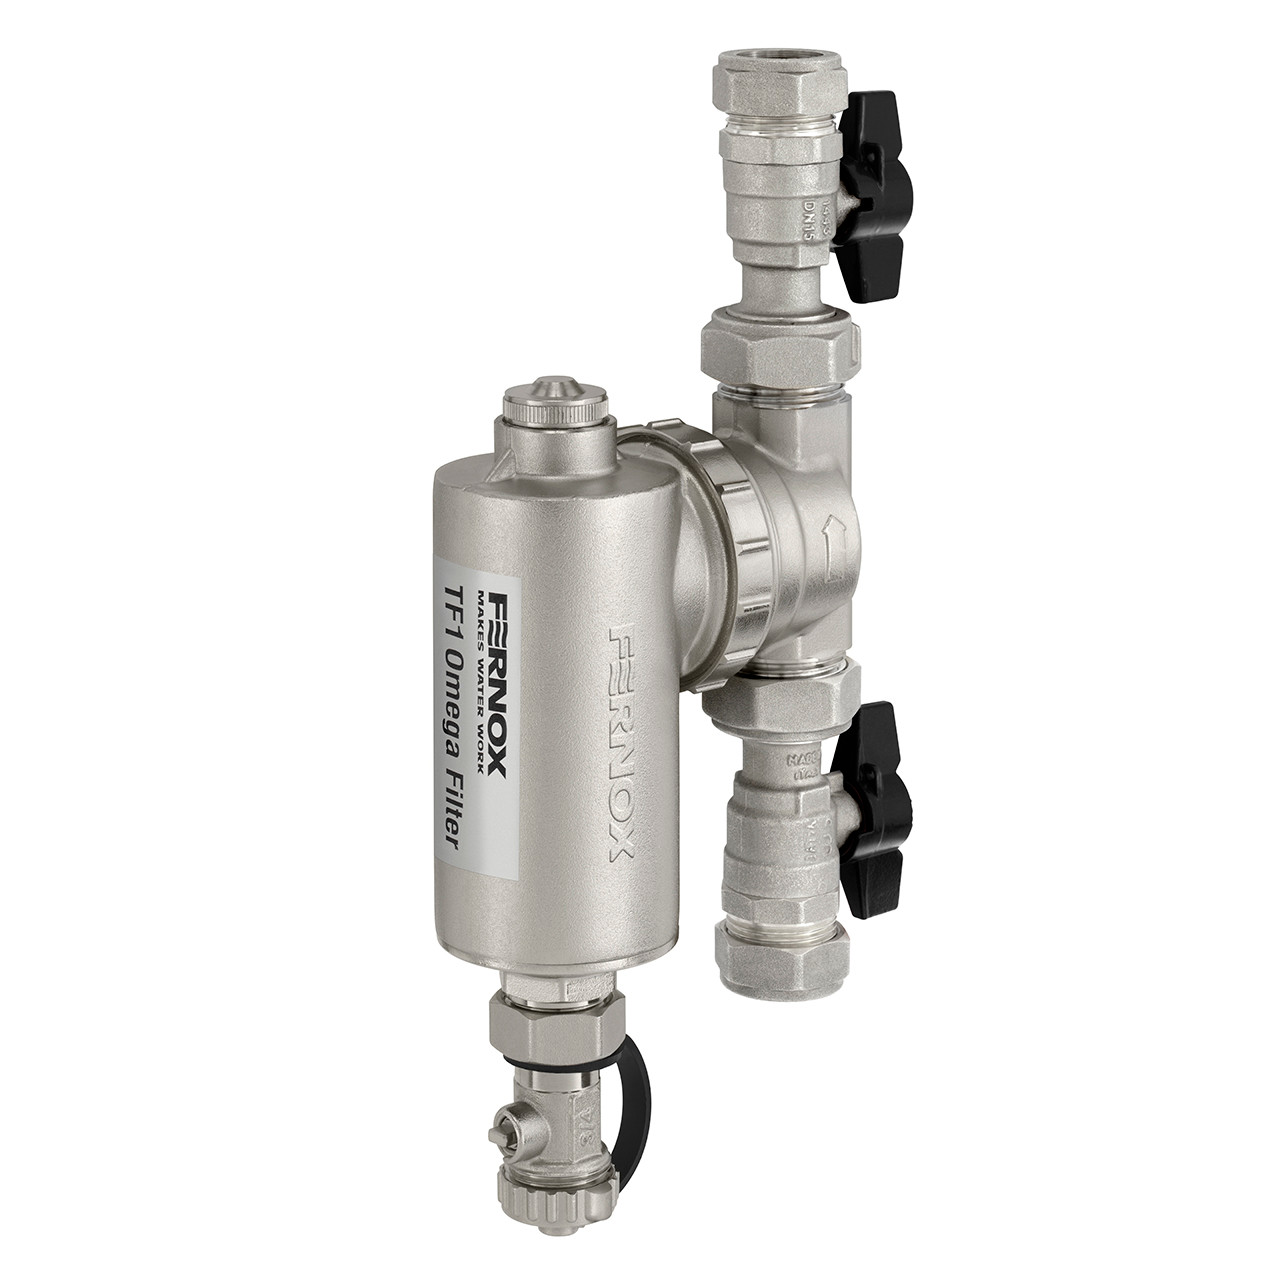 Photograph of Fernox TF1 Omega Filter 28mm With Valves